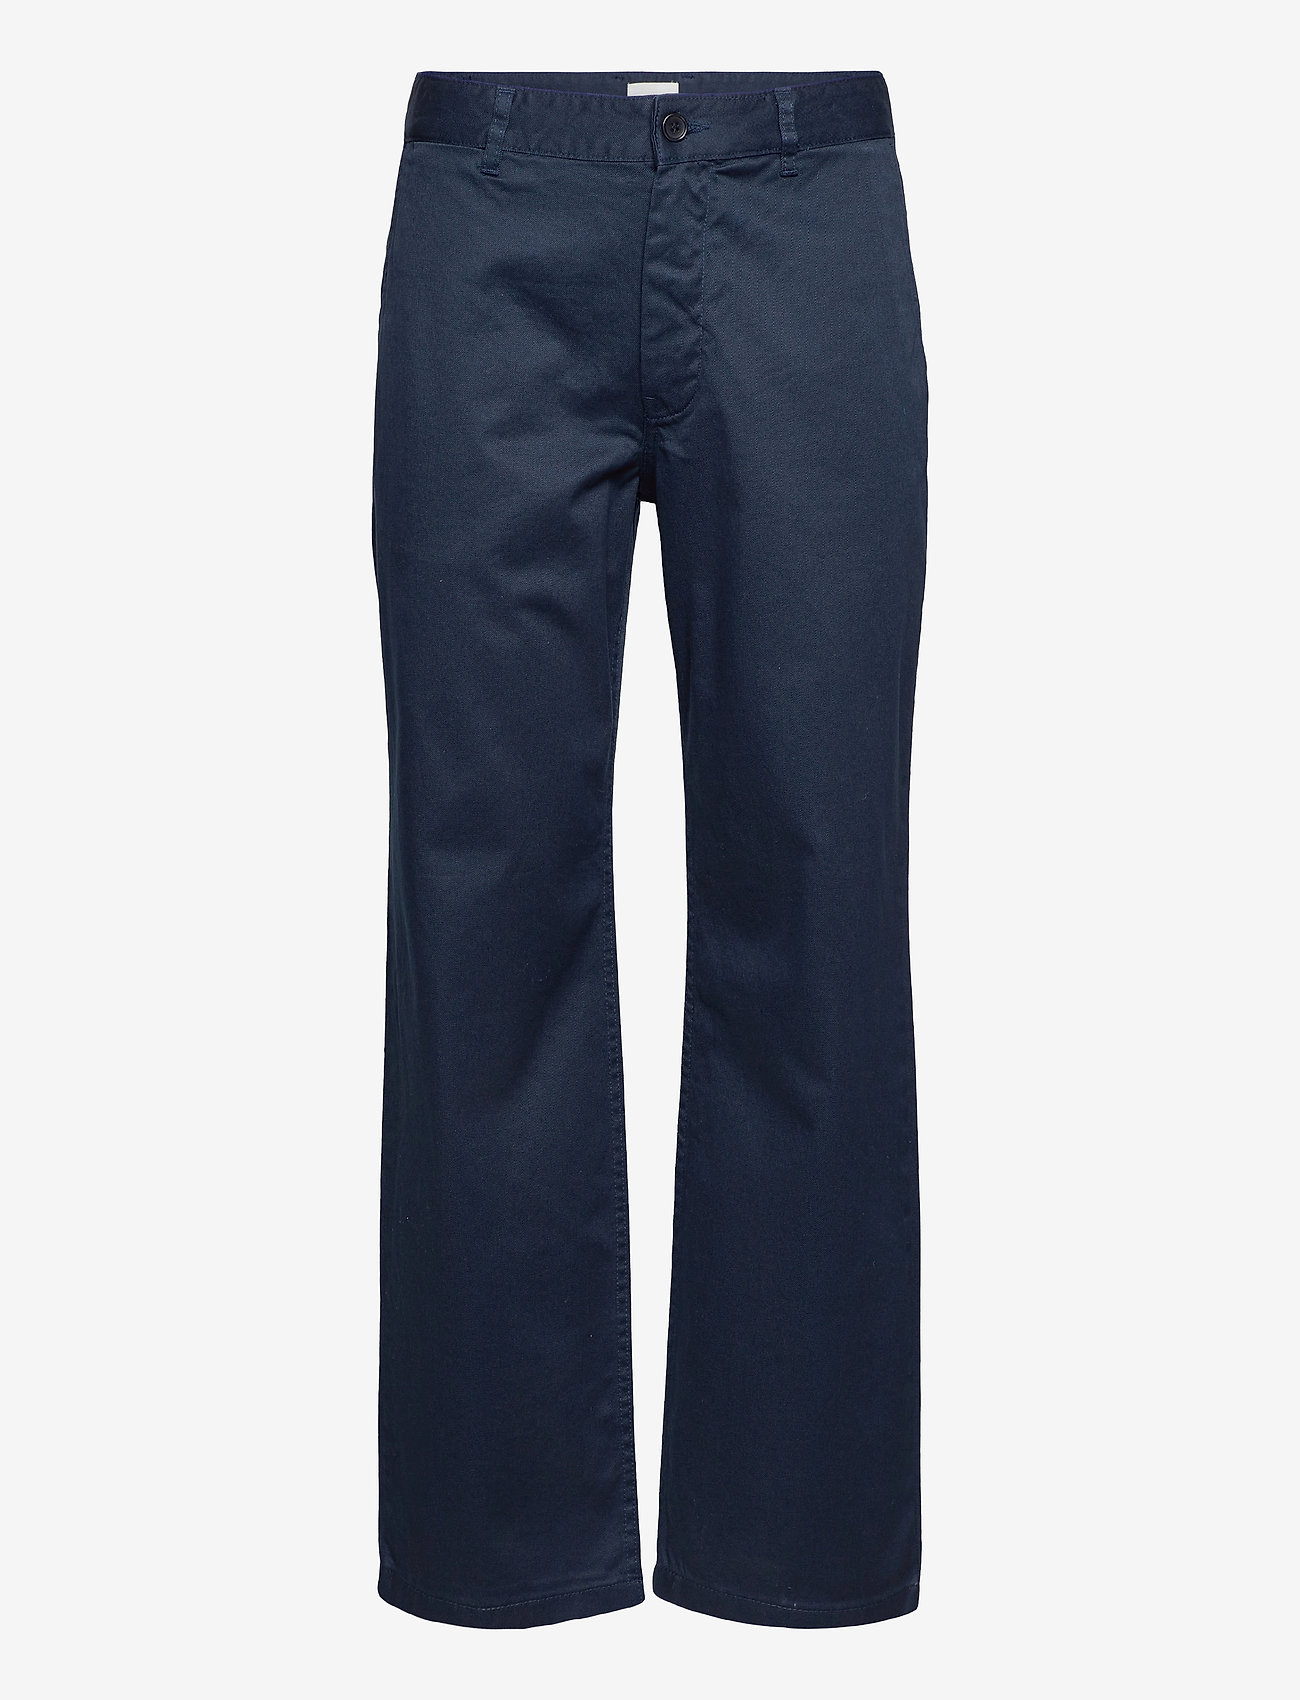 Wood Wood - Stefan classic trousers - chinos - navy - 0